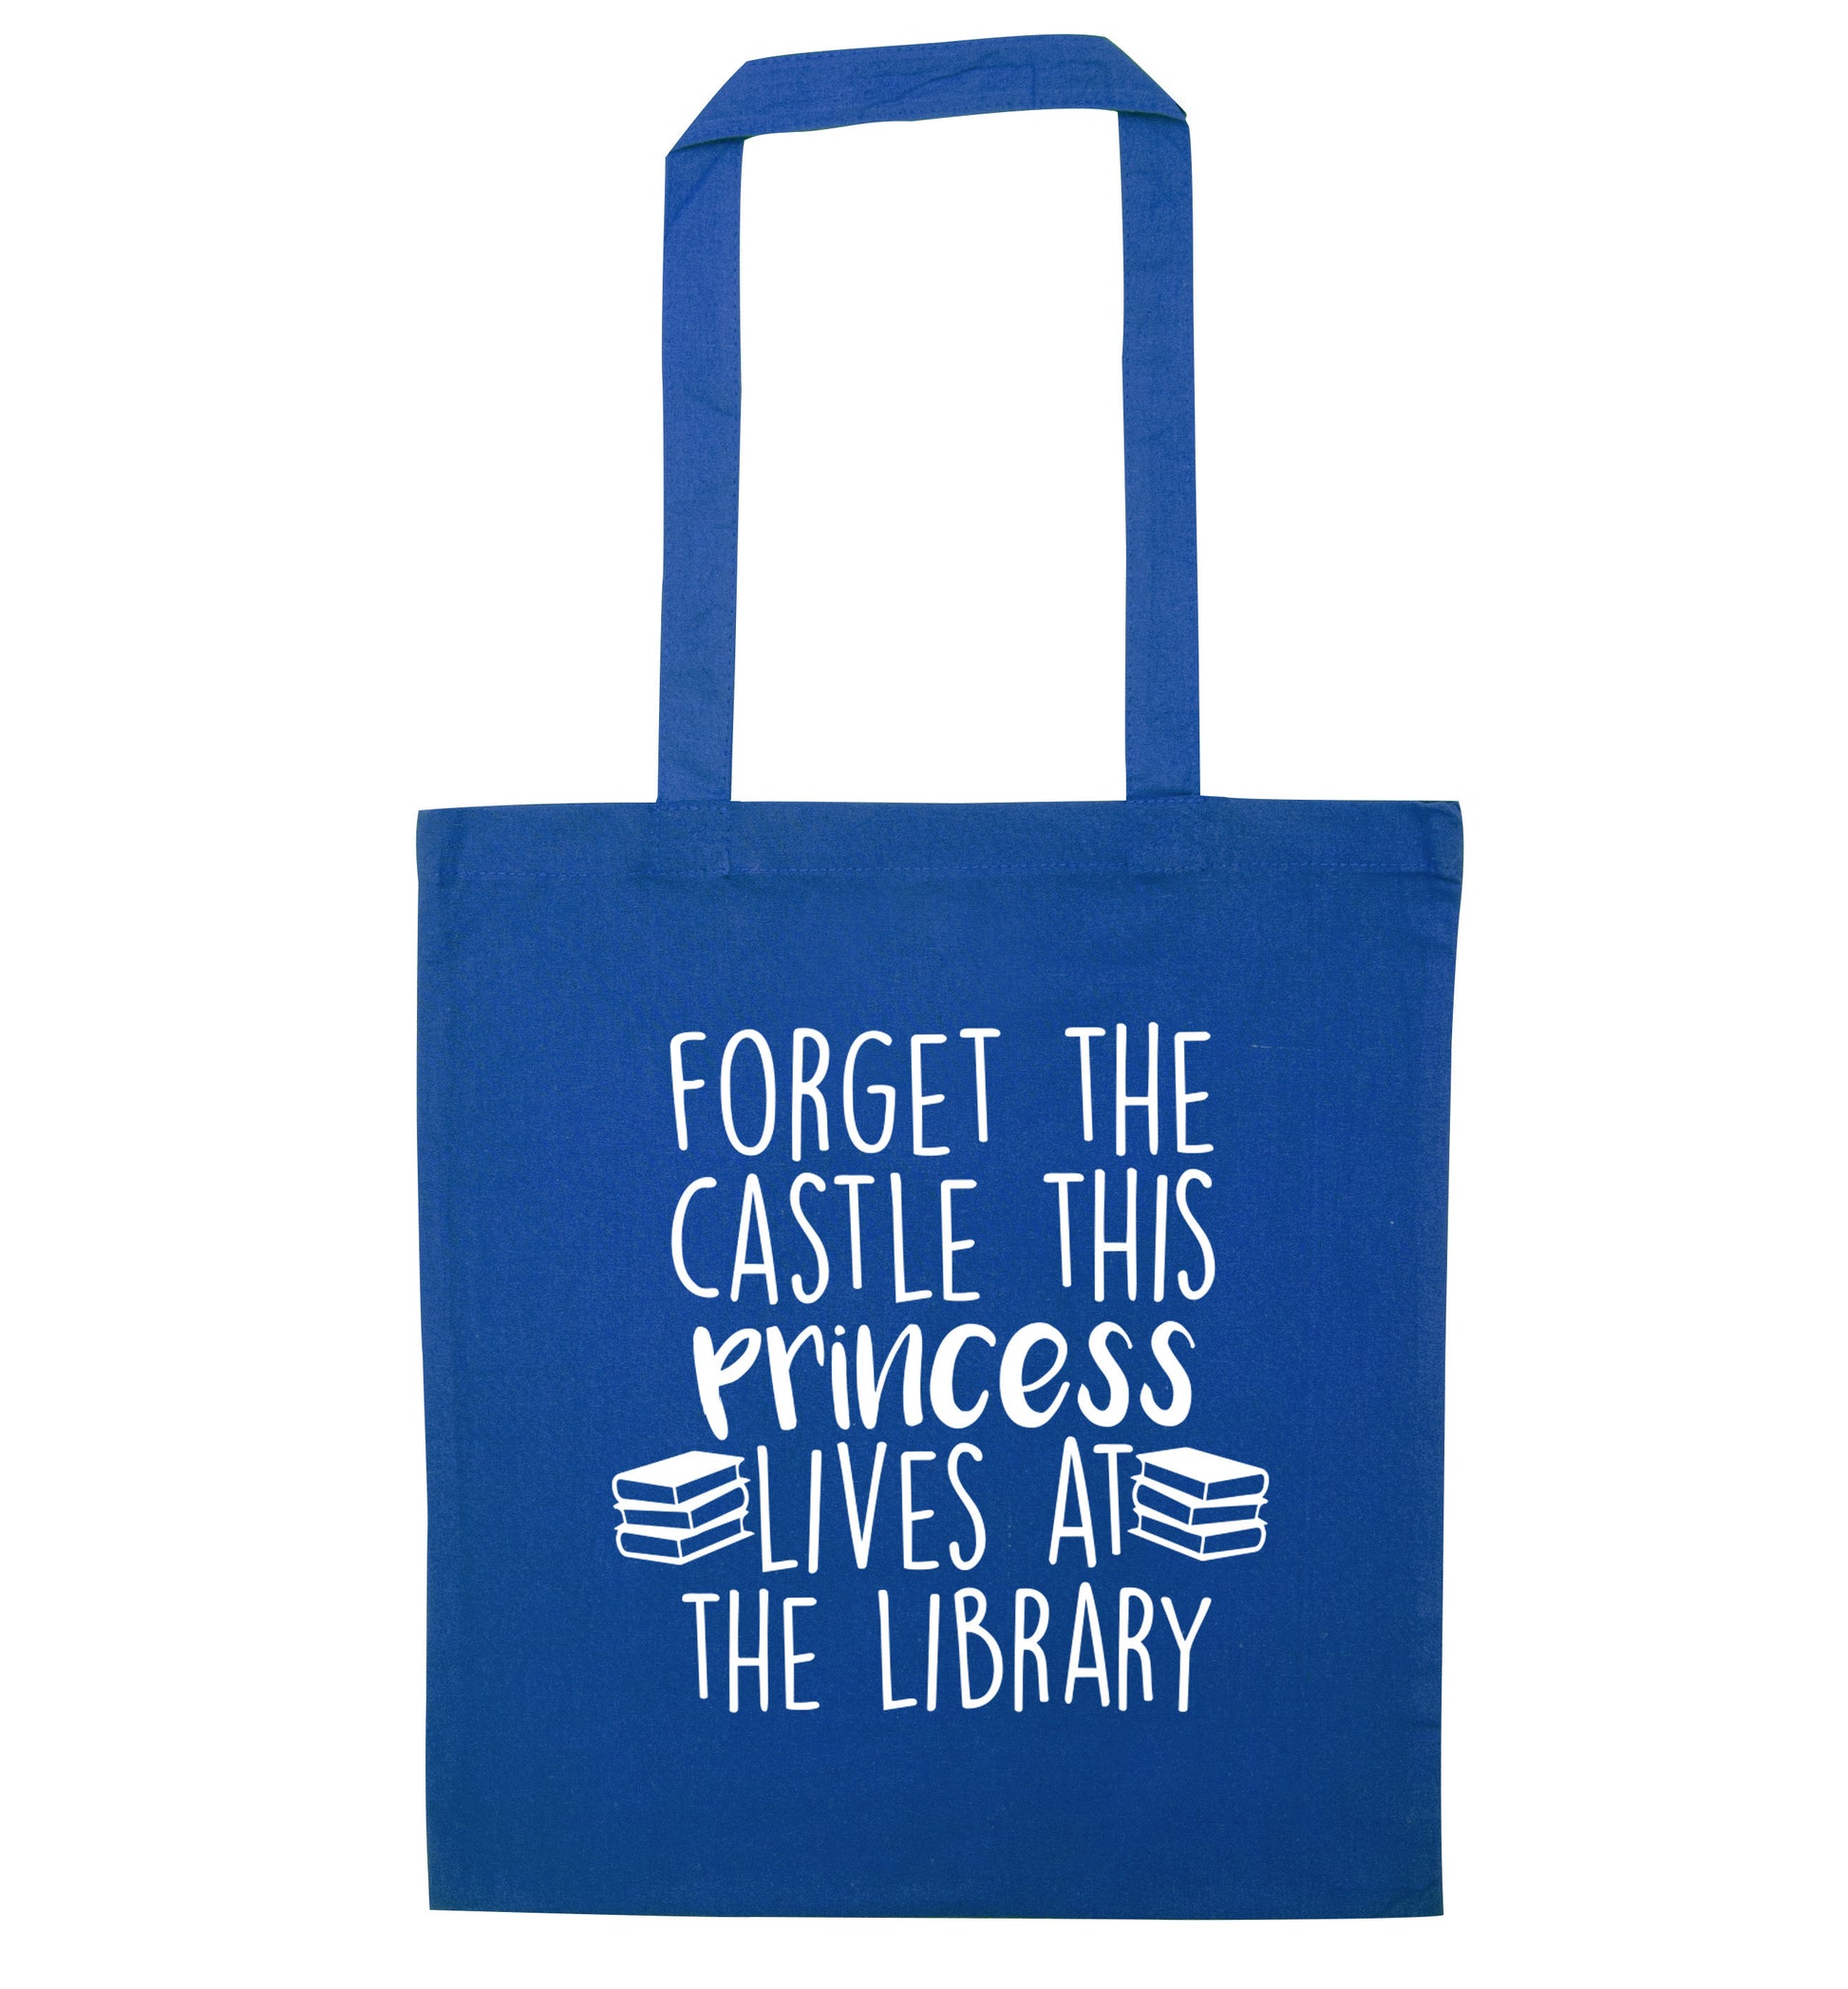 Forget the castle this princess lives at the library blue tote bag